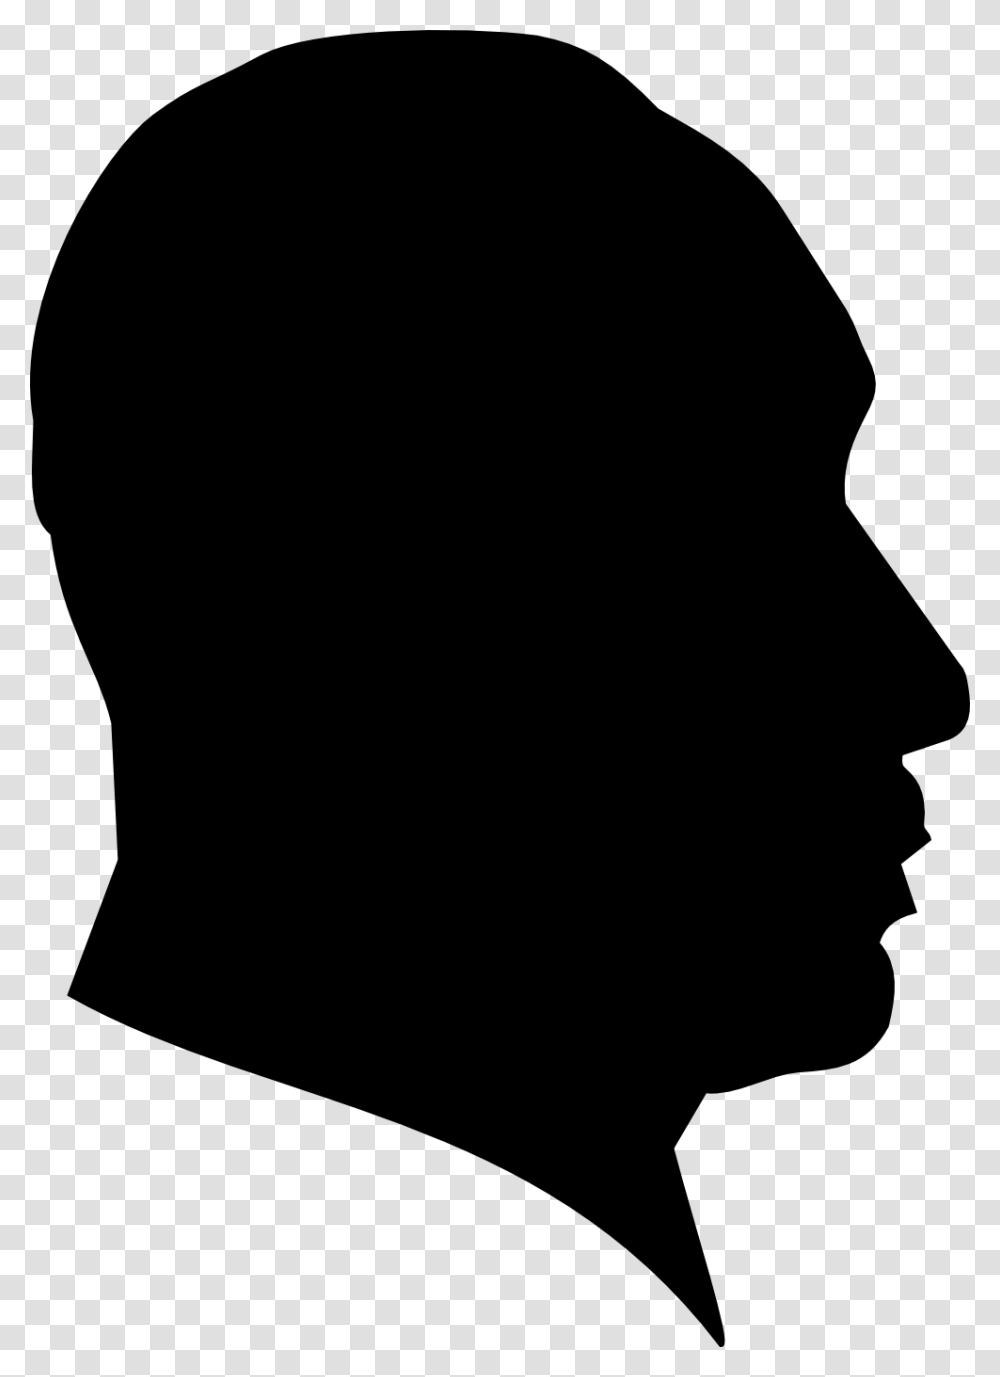 Dr Martin Luther King Profile Silhouette History, Baseball Cap, Hat, Apparel Transparent Png